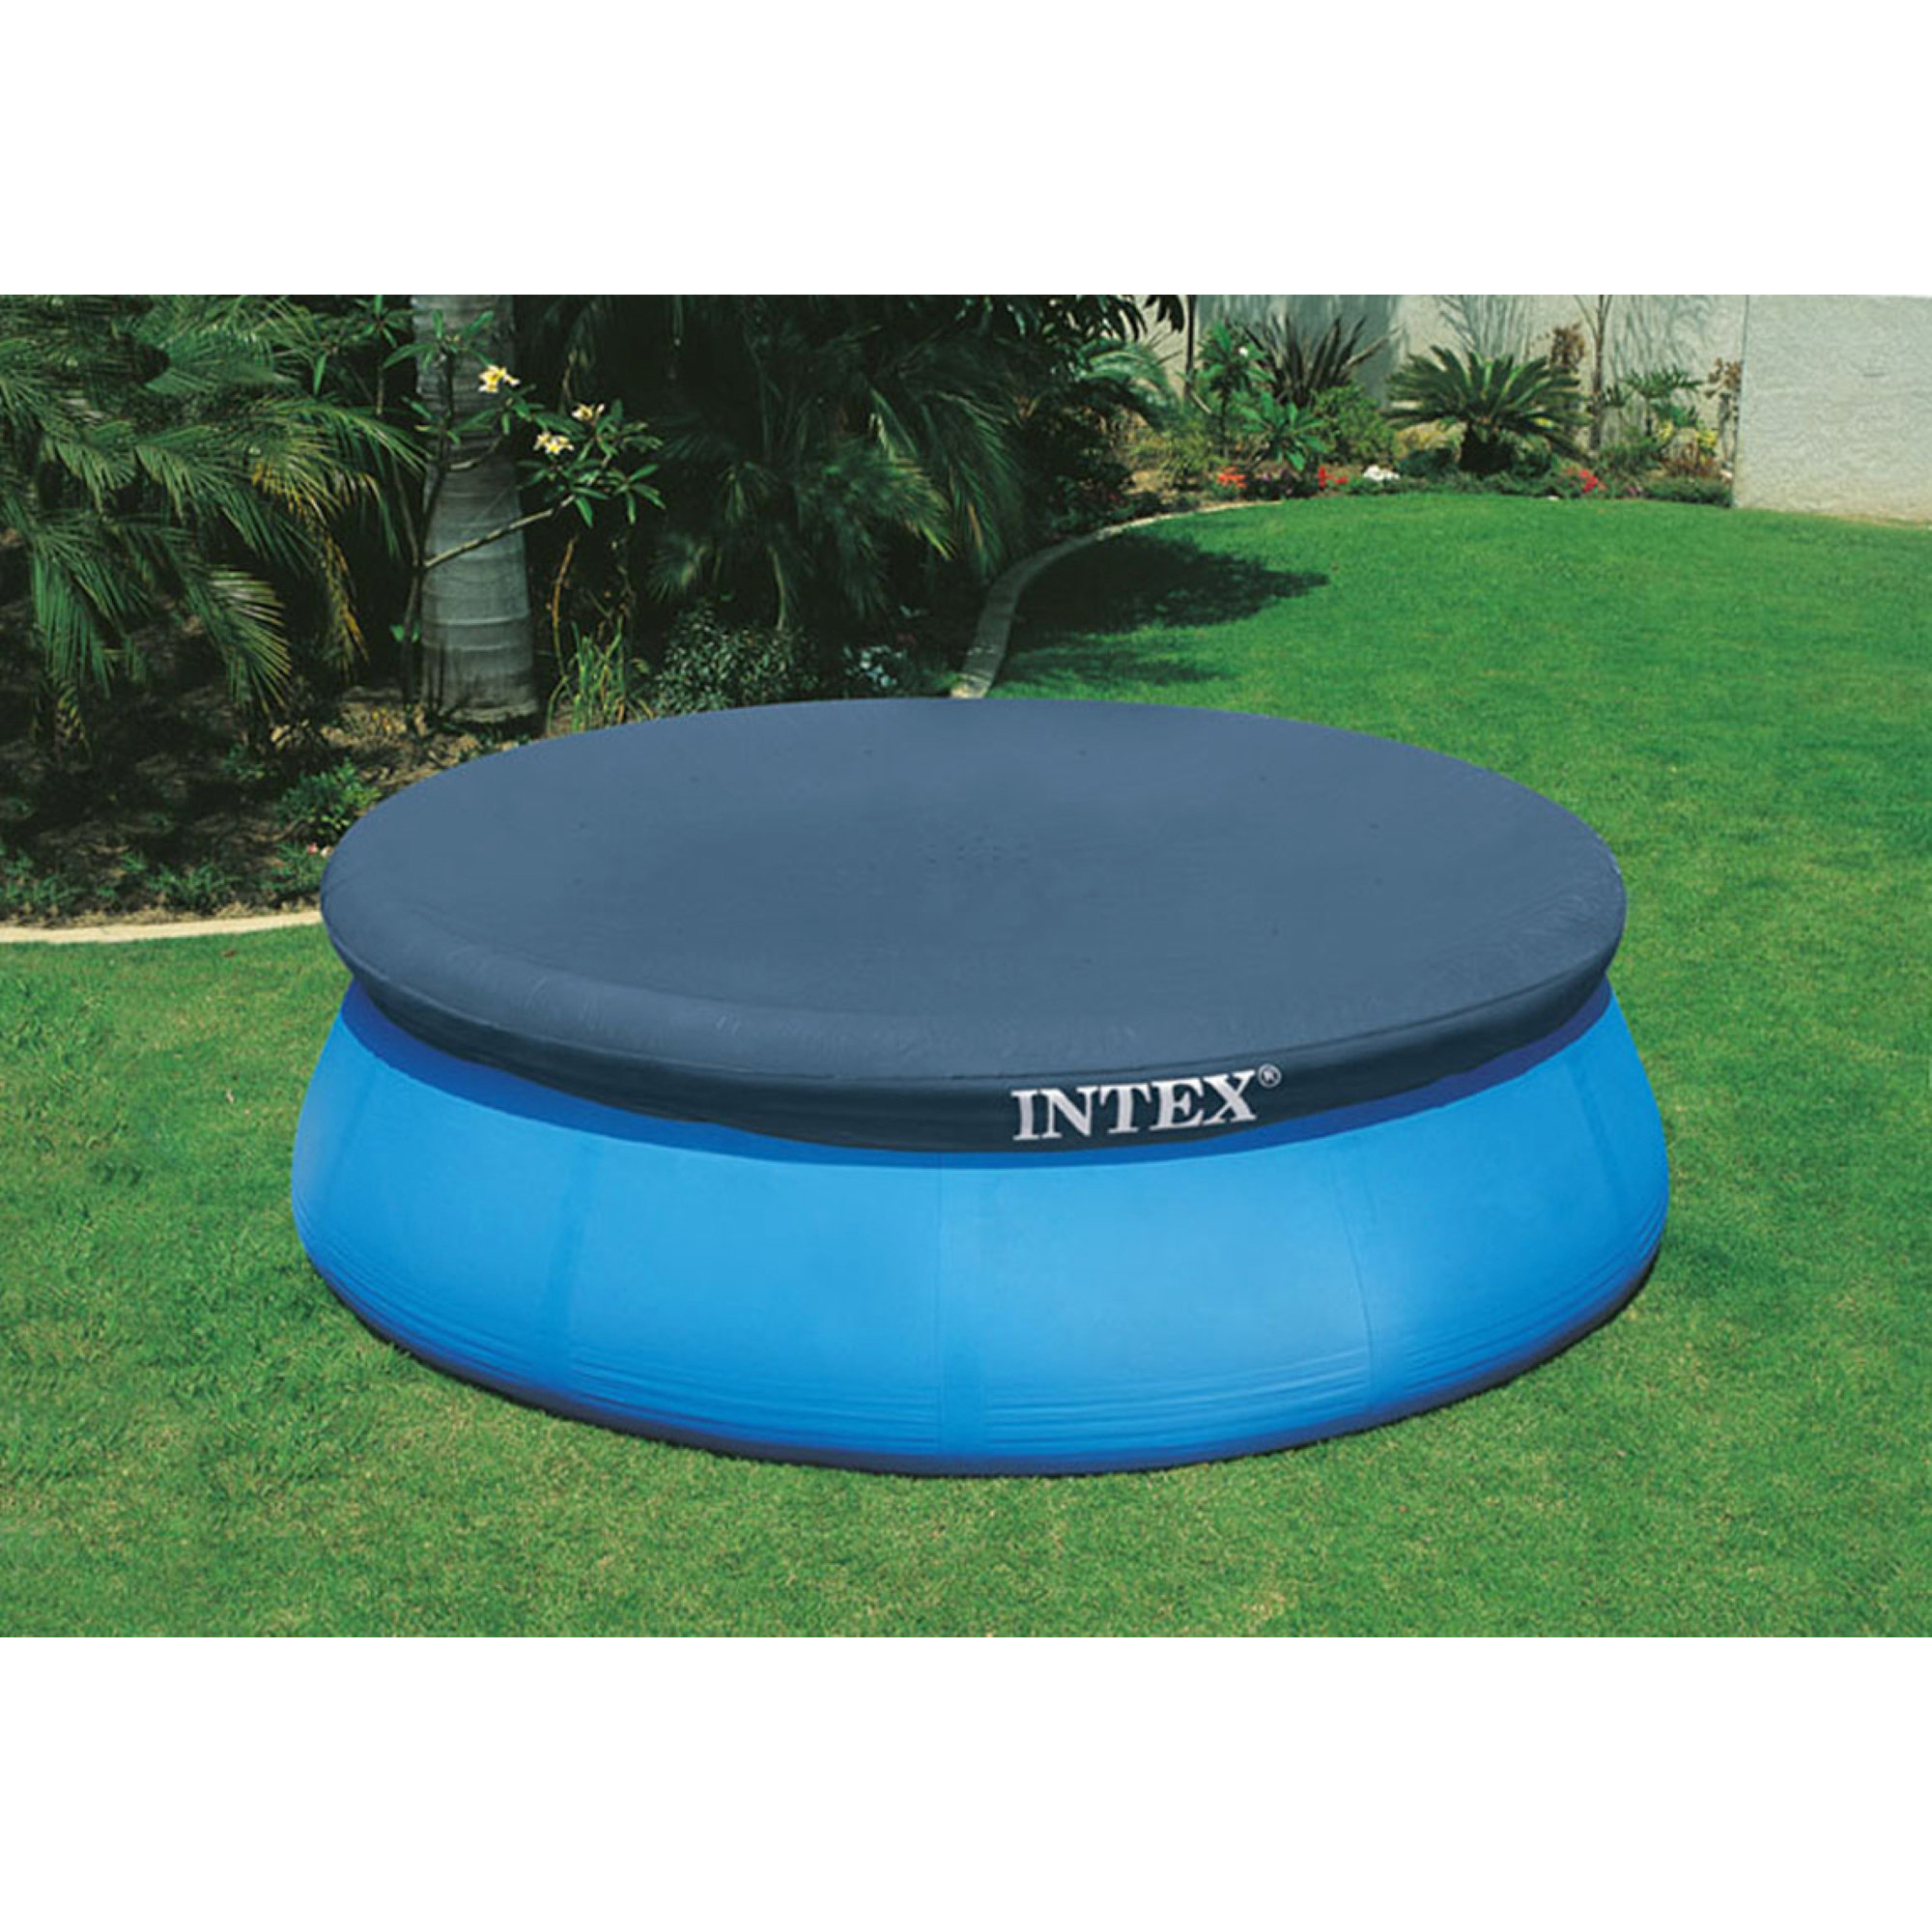 Intex 8ft Easy Set Inflatable Above Ground Round Swimming Pool and